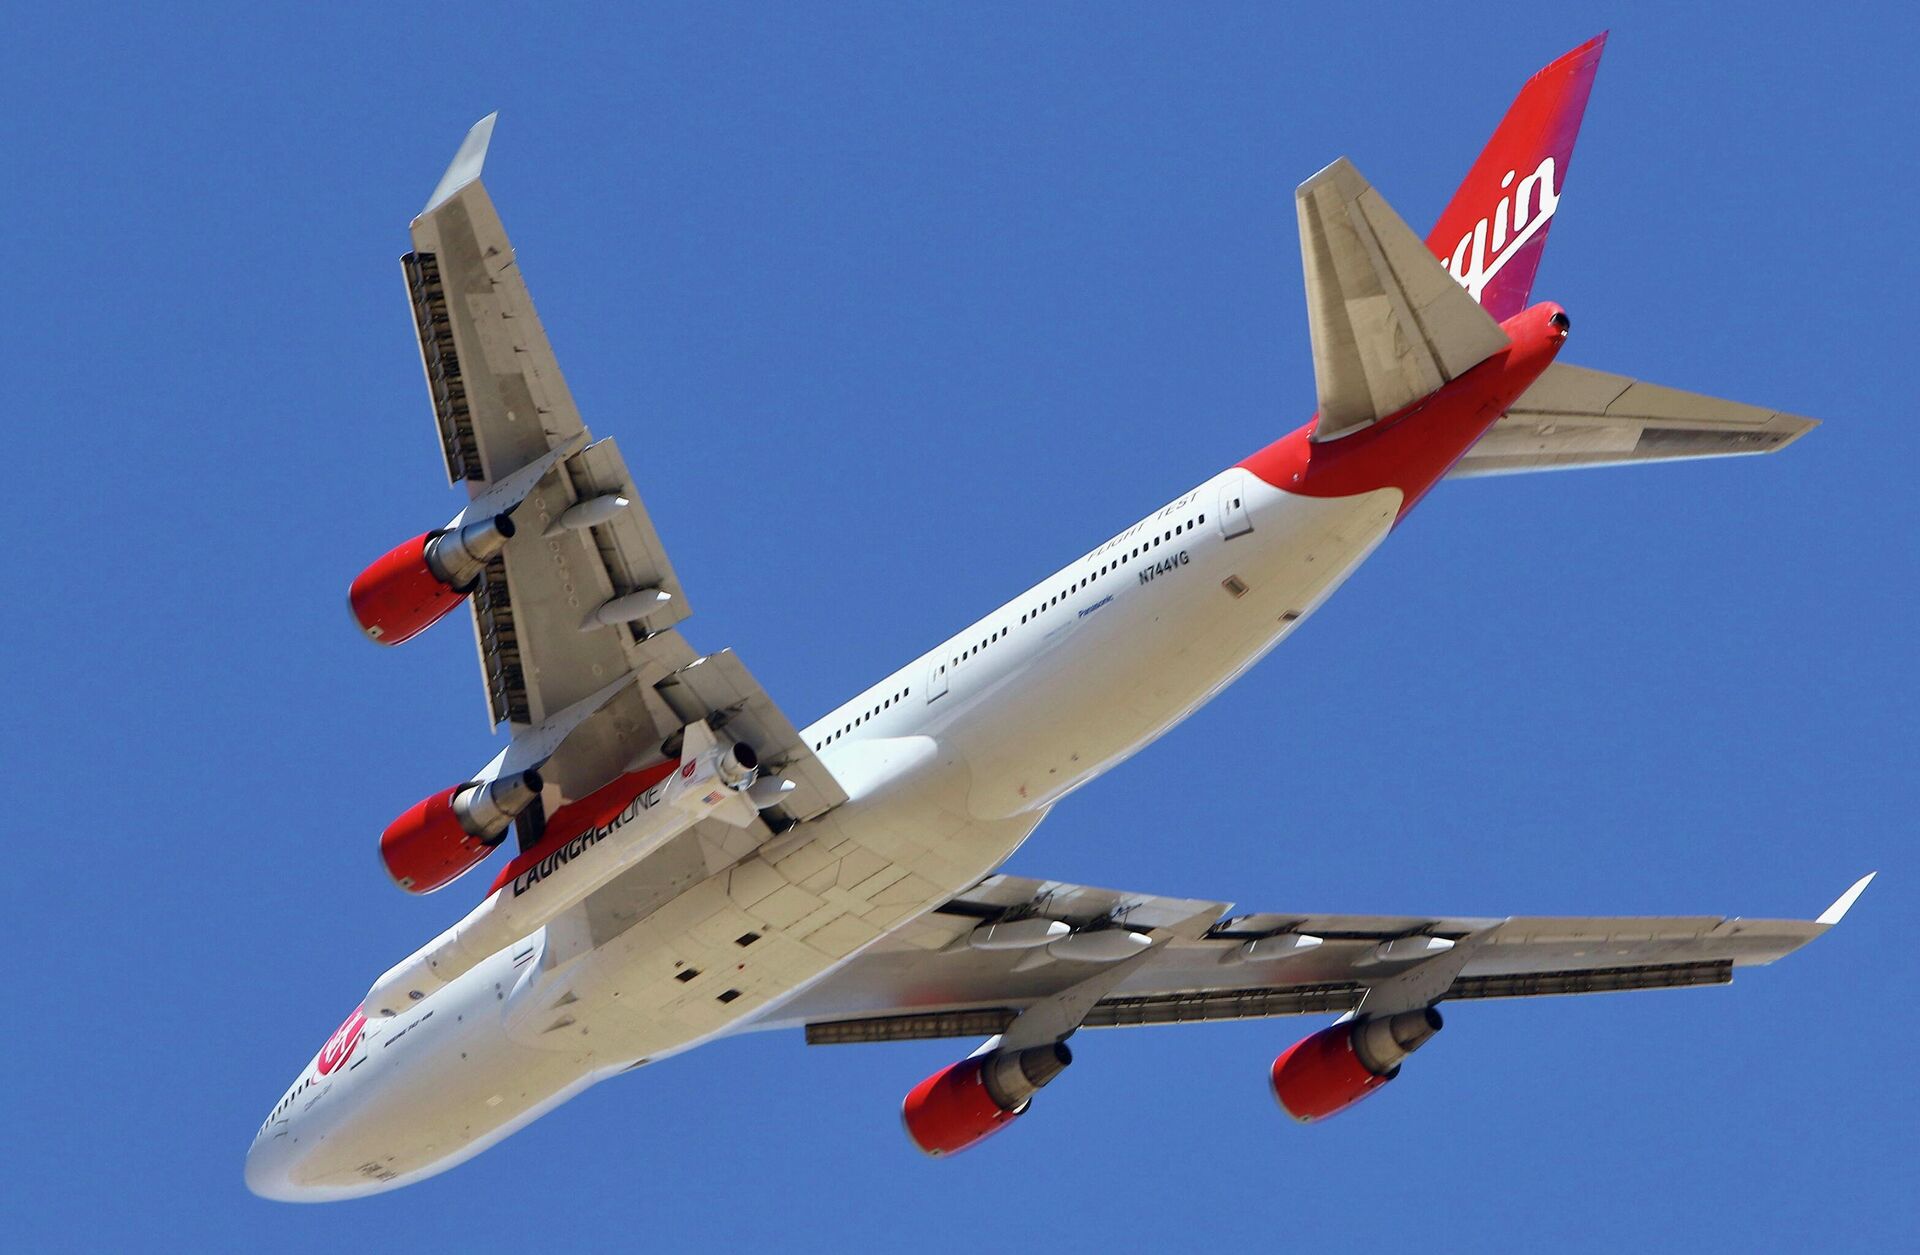 In this Jan. 17, 2021, file photo, Virgin Orbit Boeing 747-400 rocket launch platform takes off from Mojave Air and Space Port, Mojave (MHV) on its second orbital launch demonstration of LauncherOne rocket in the Mojave Desert, north of Los Angeles.  - Sputnik International, 1920, 13.05.2022